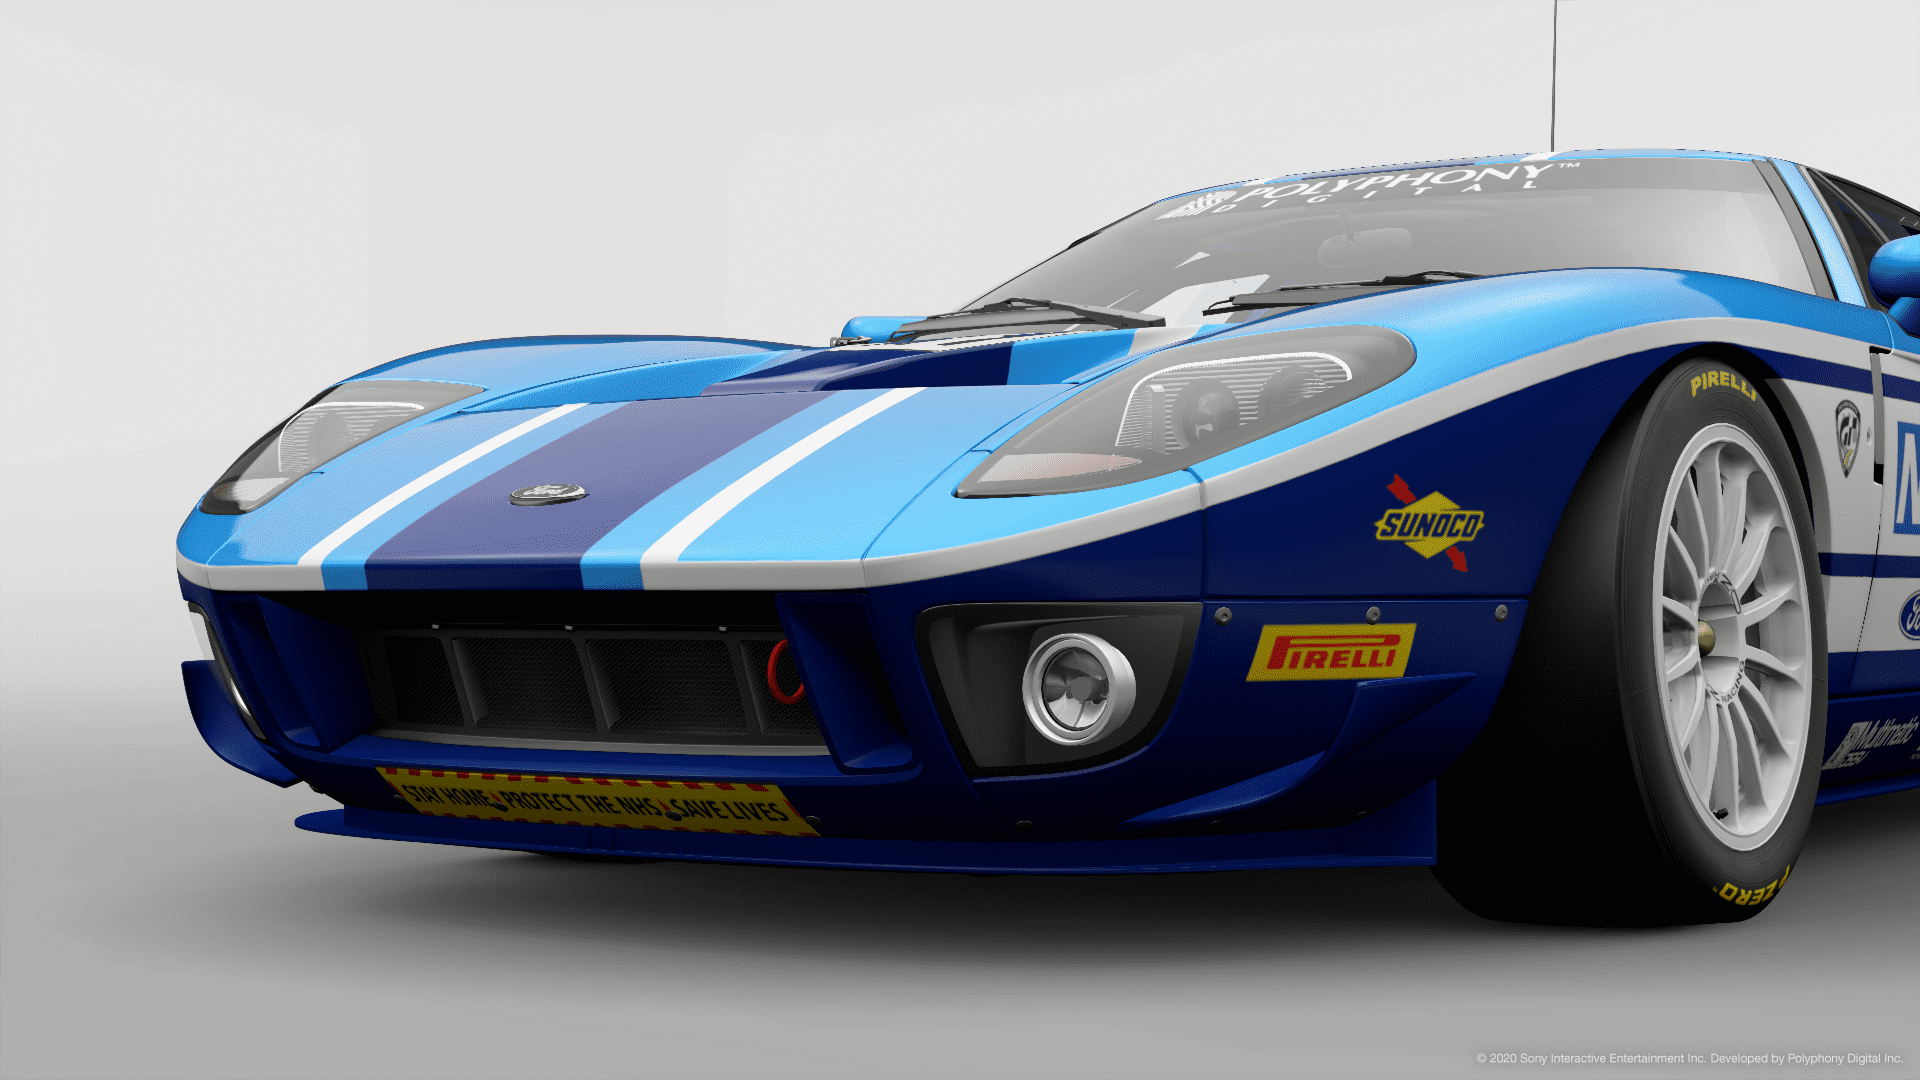 Ford Sport GER 2 - Car Livery by FlavourKev, Community